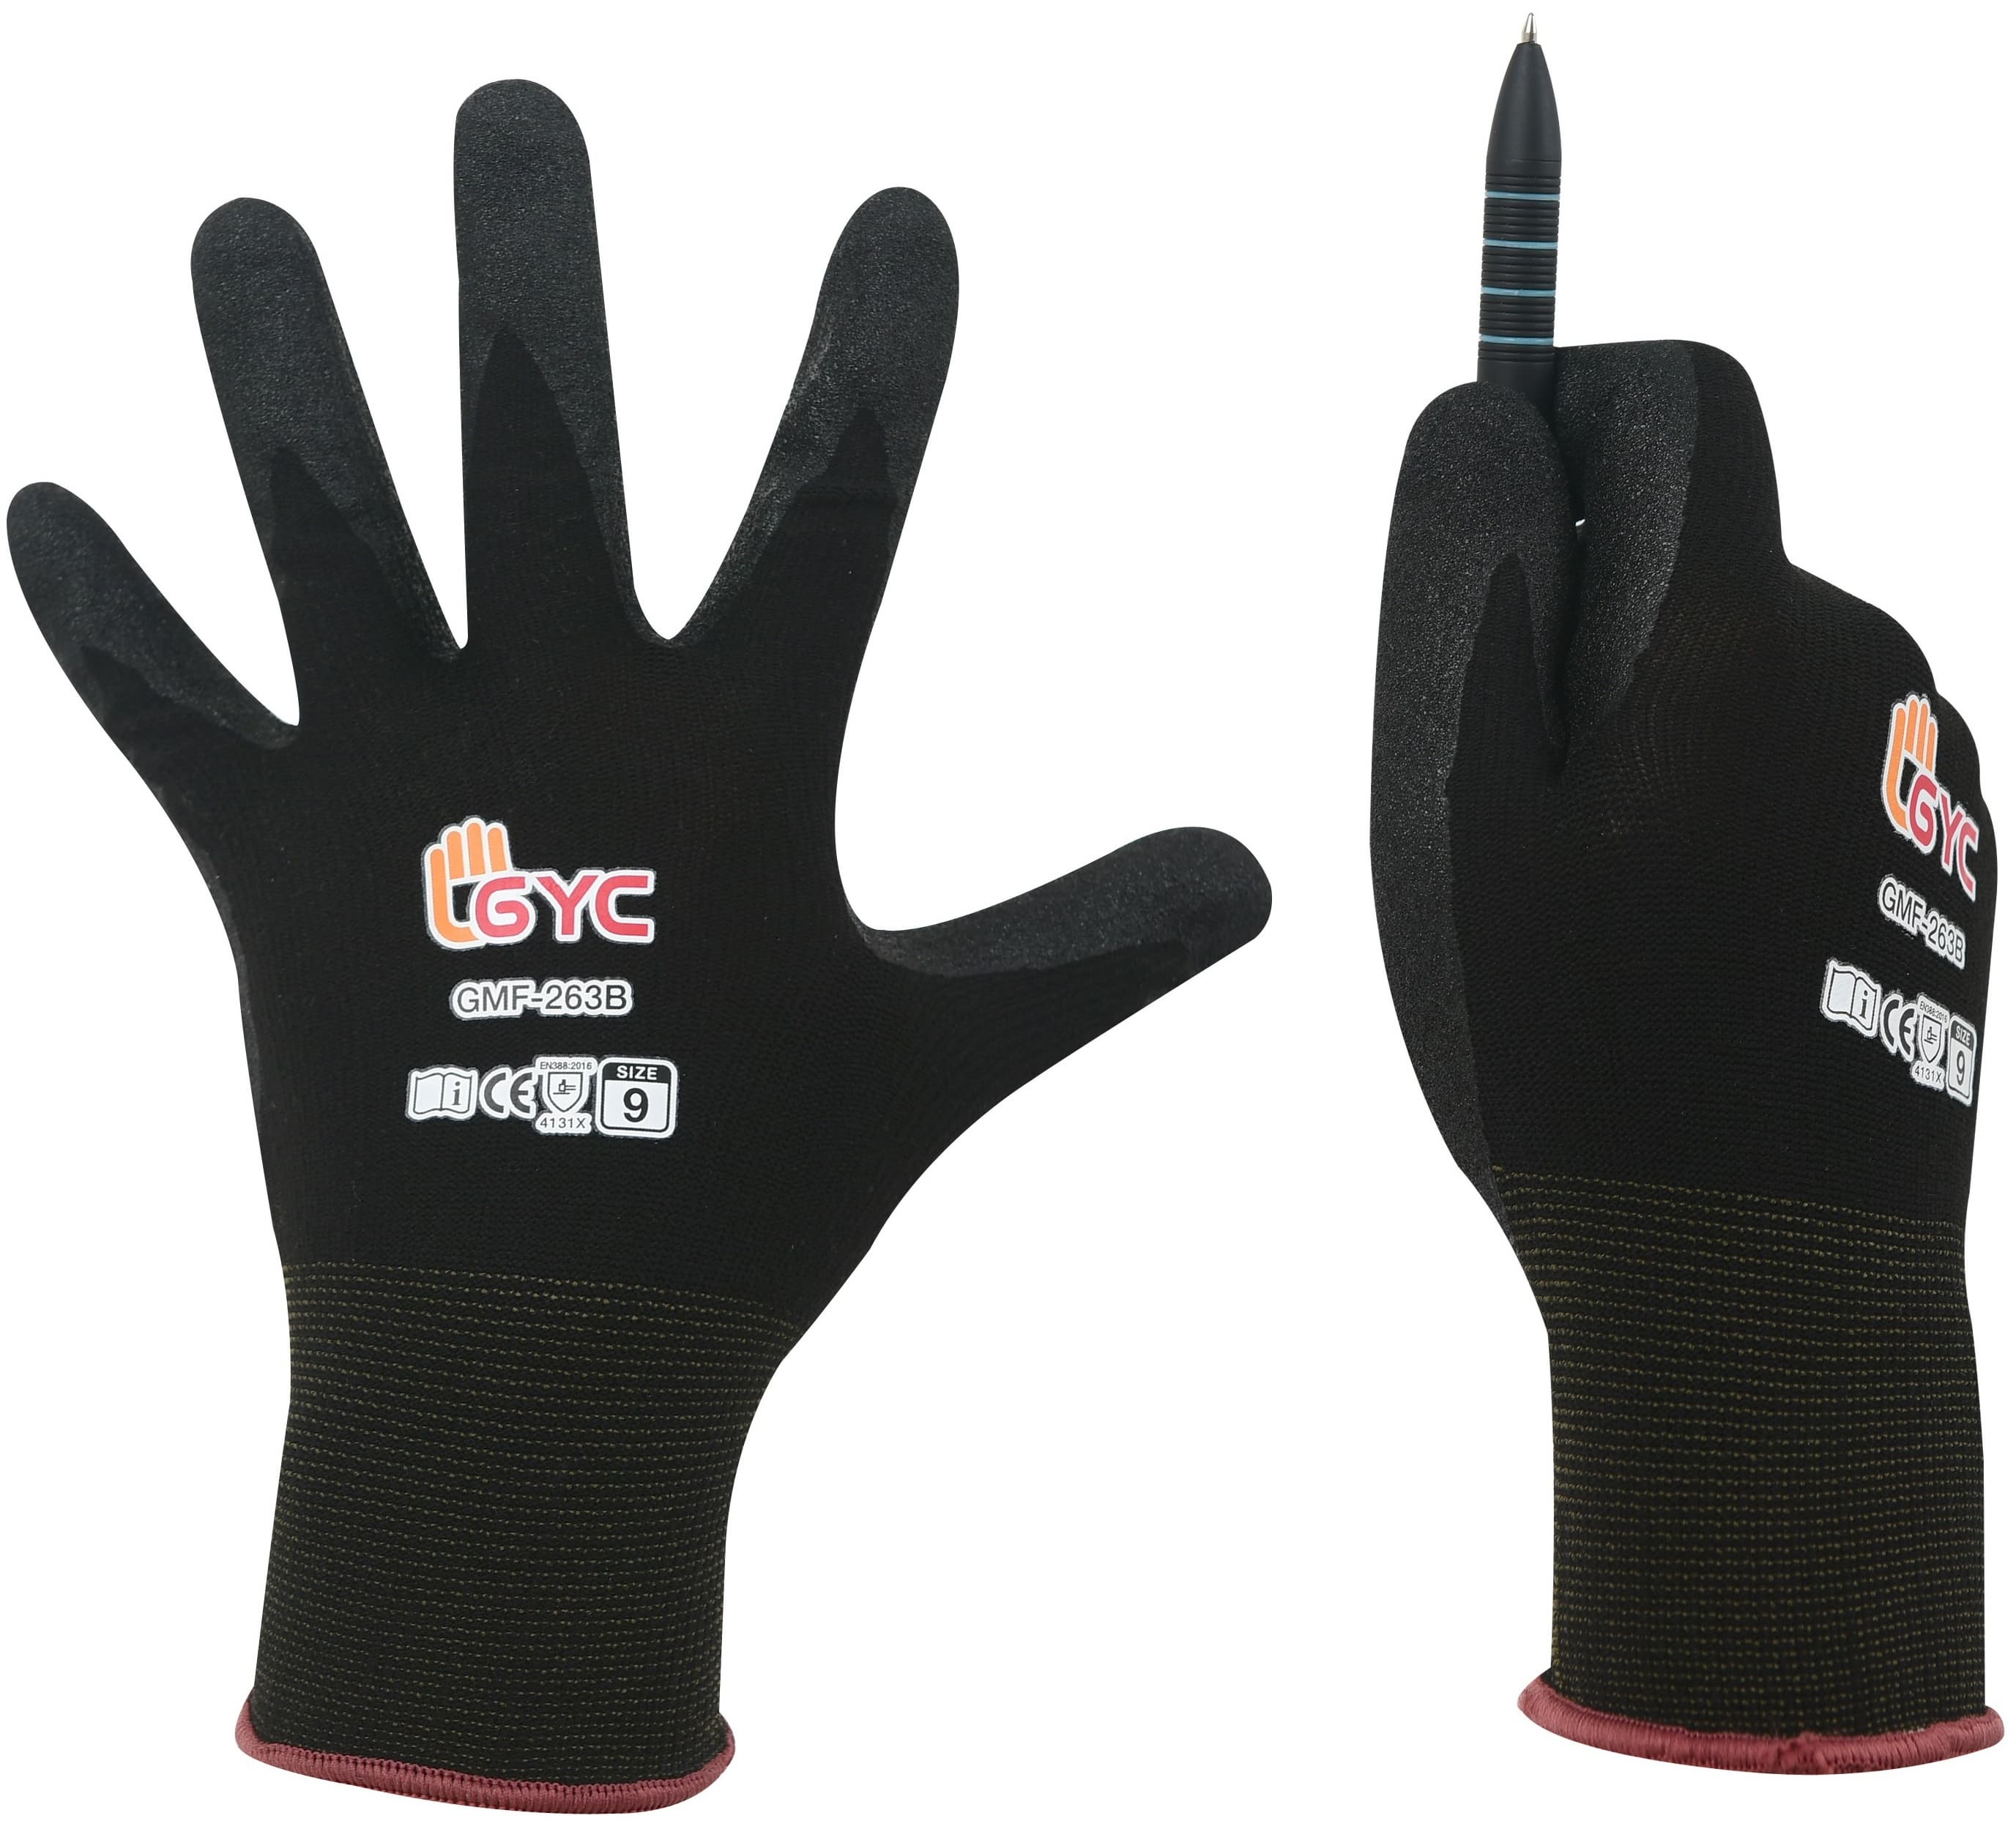 GMF_263B _ General Purpose_ Oil _ Dry Grip_ Nitrile Micro Finish Safety Work Gloves